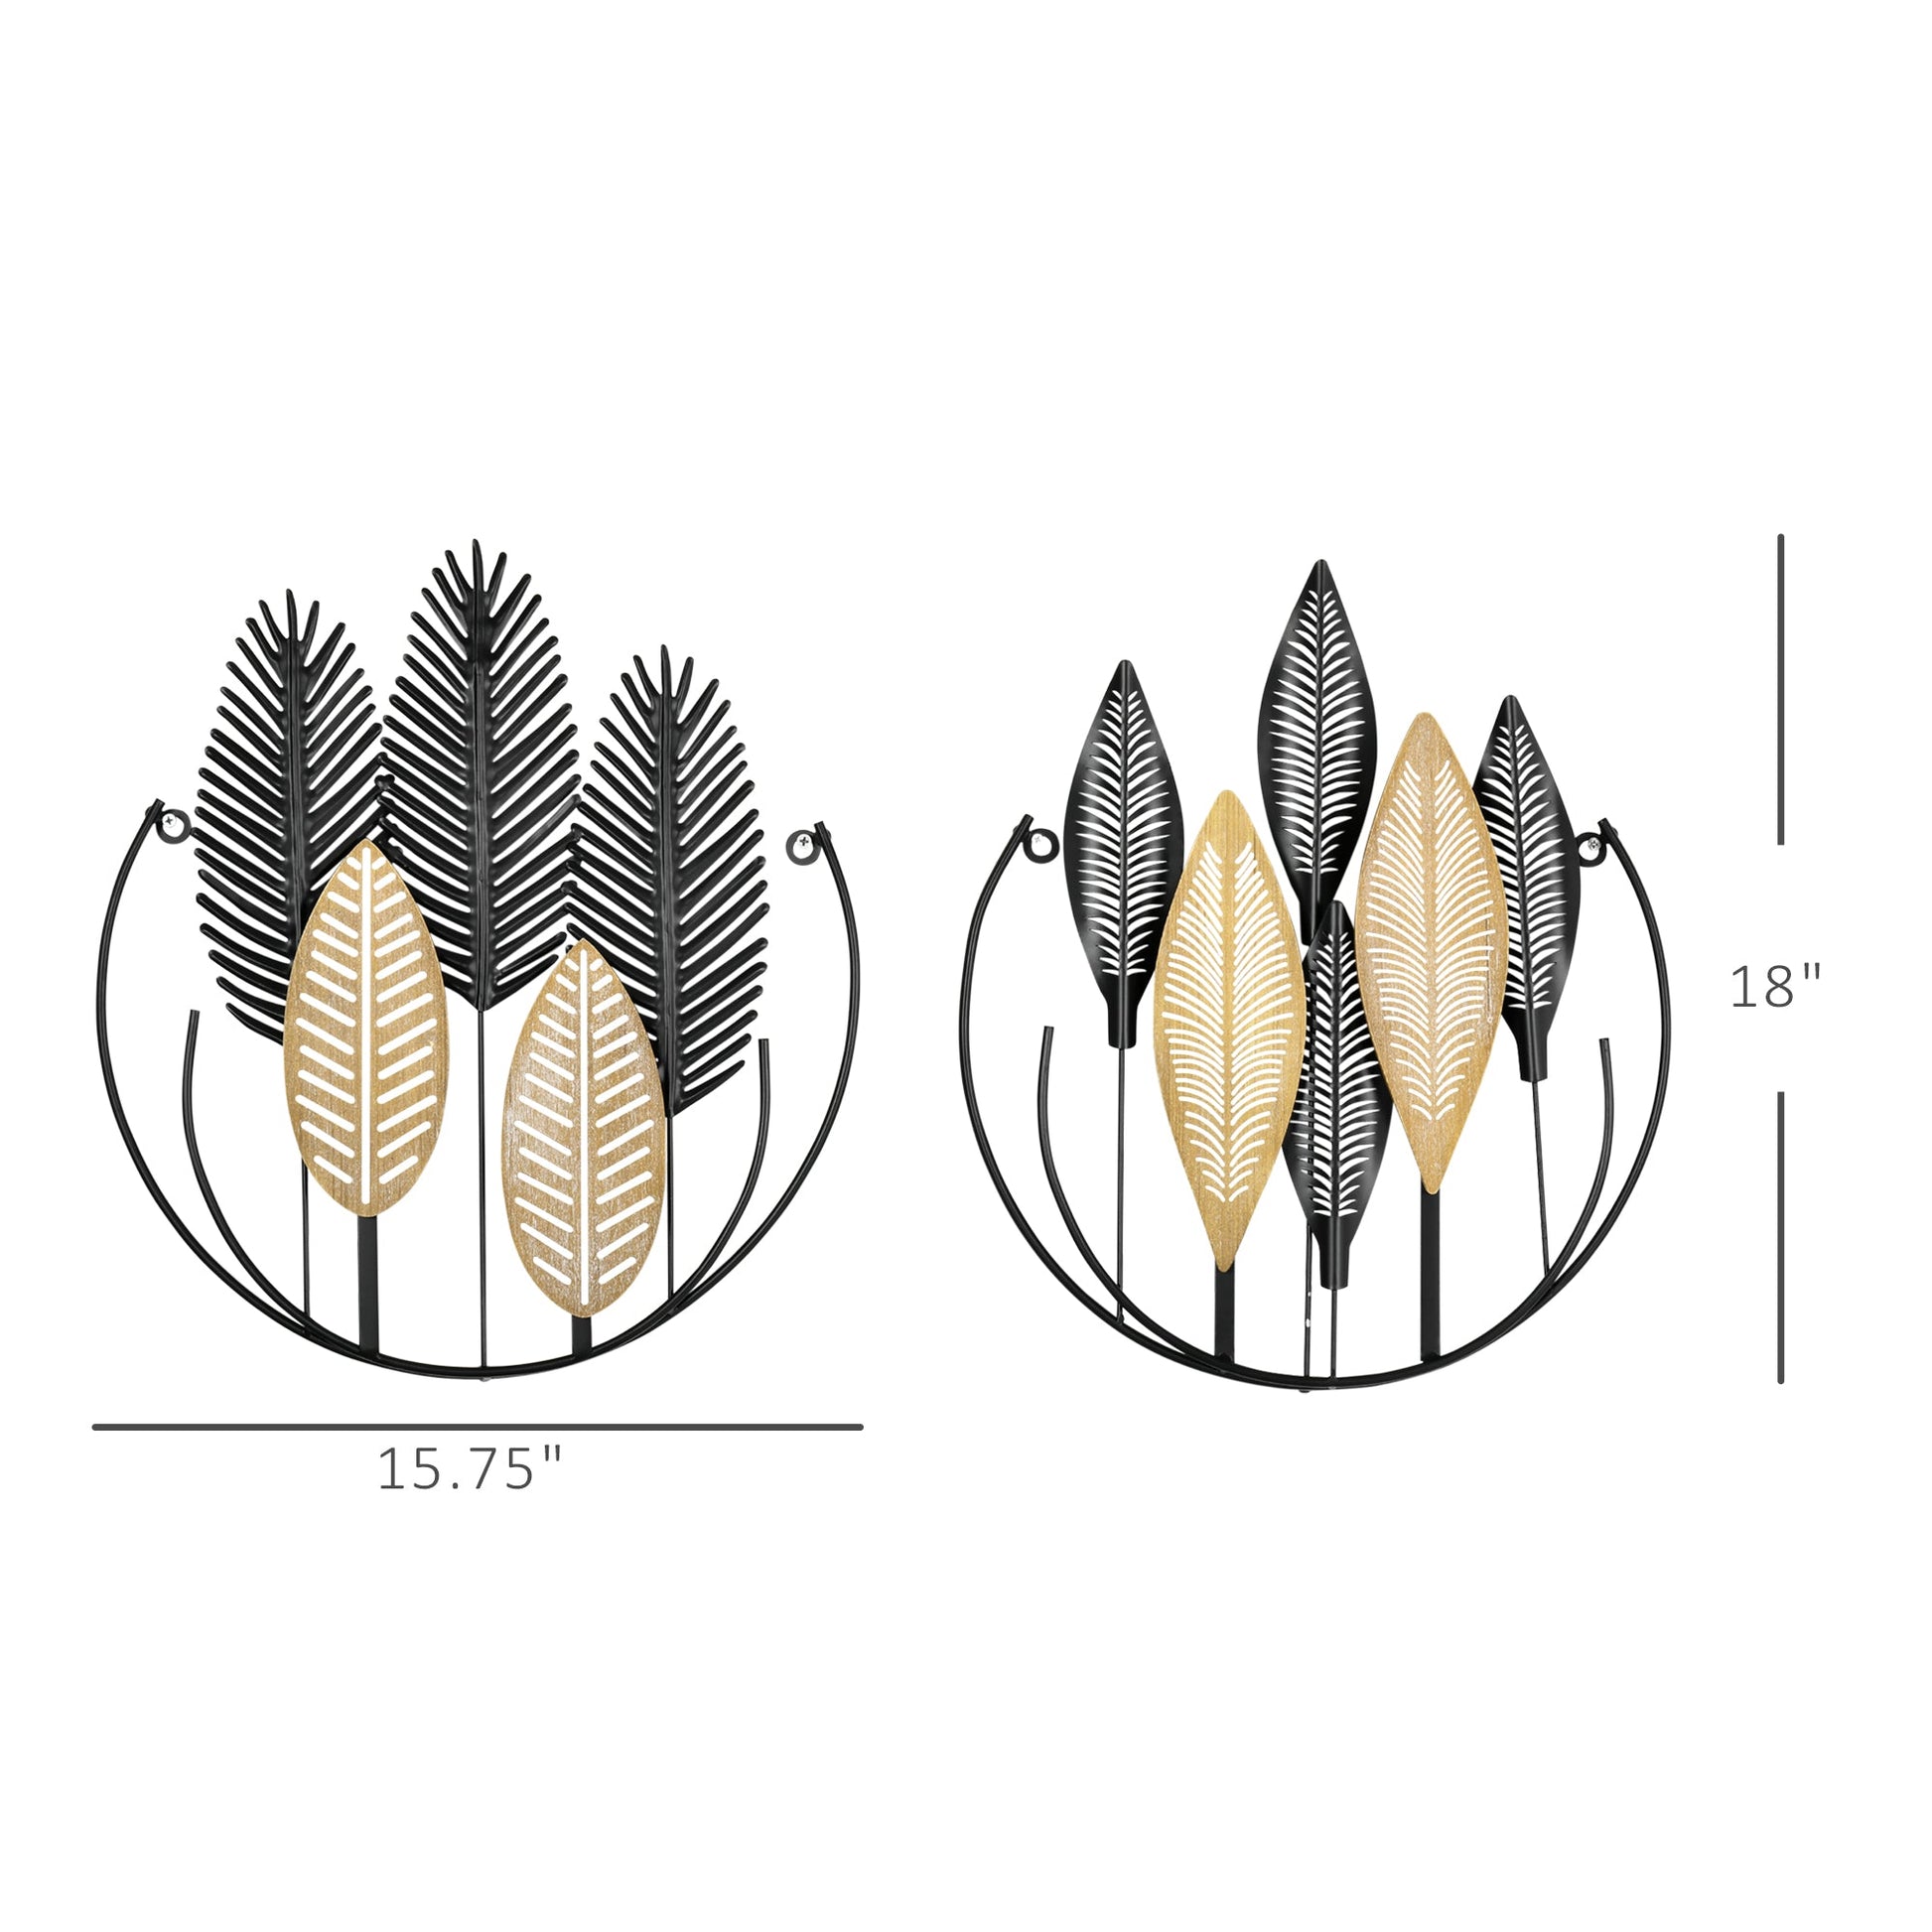 3D Metal Wall Art Set of 2 Modern Leaves Hanging Wall Sculpture Home Decor for Living Room Bedroom Kitchen 16"x18", Black Yellow at Gallery Canada